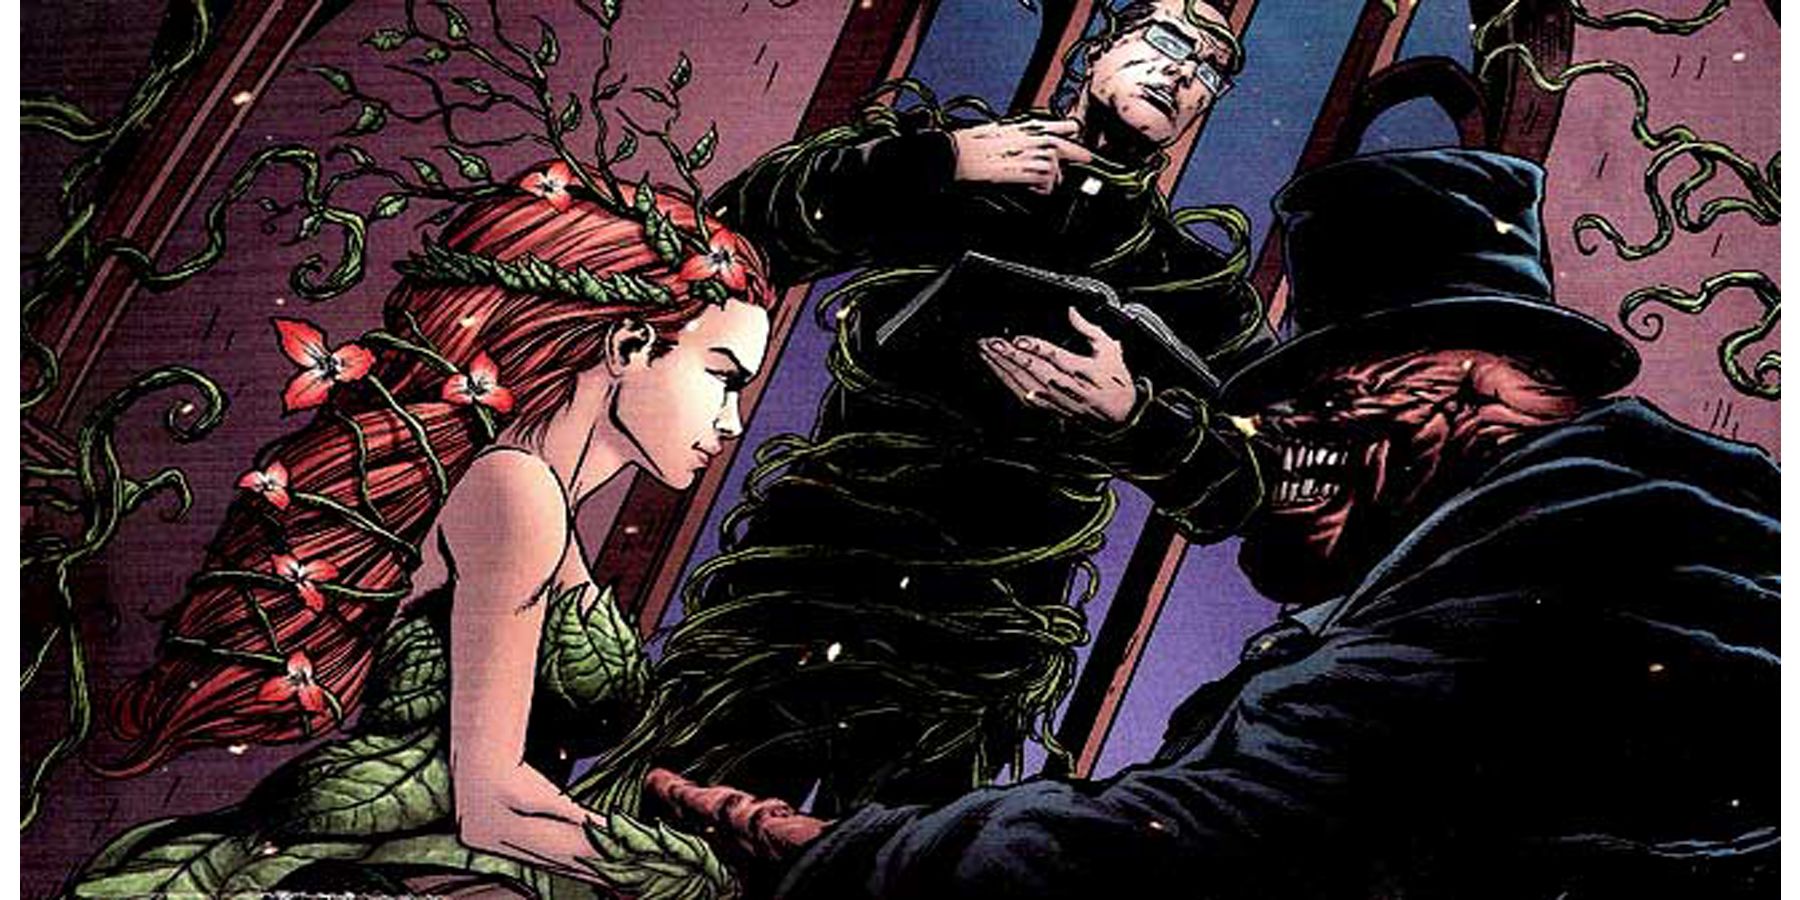 Poison Ivy and Clayface